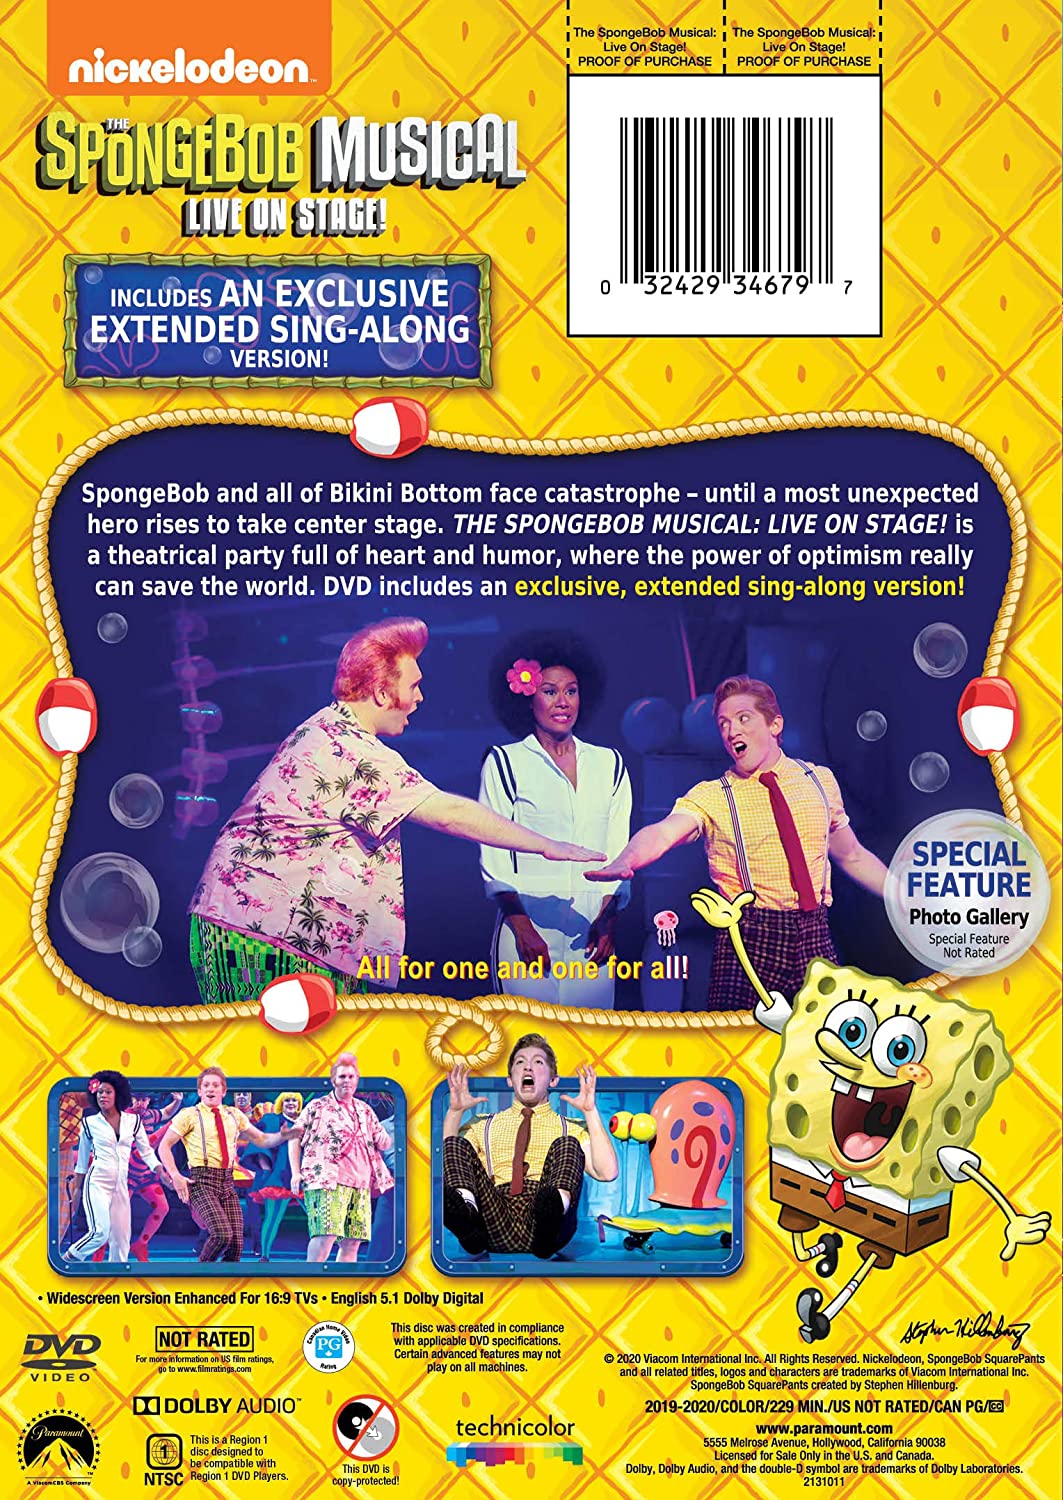 Nickalive Nickelodeon To Release The Spongebob Musical Live On Stage On Dvd On November 3